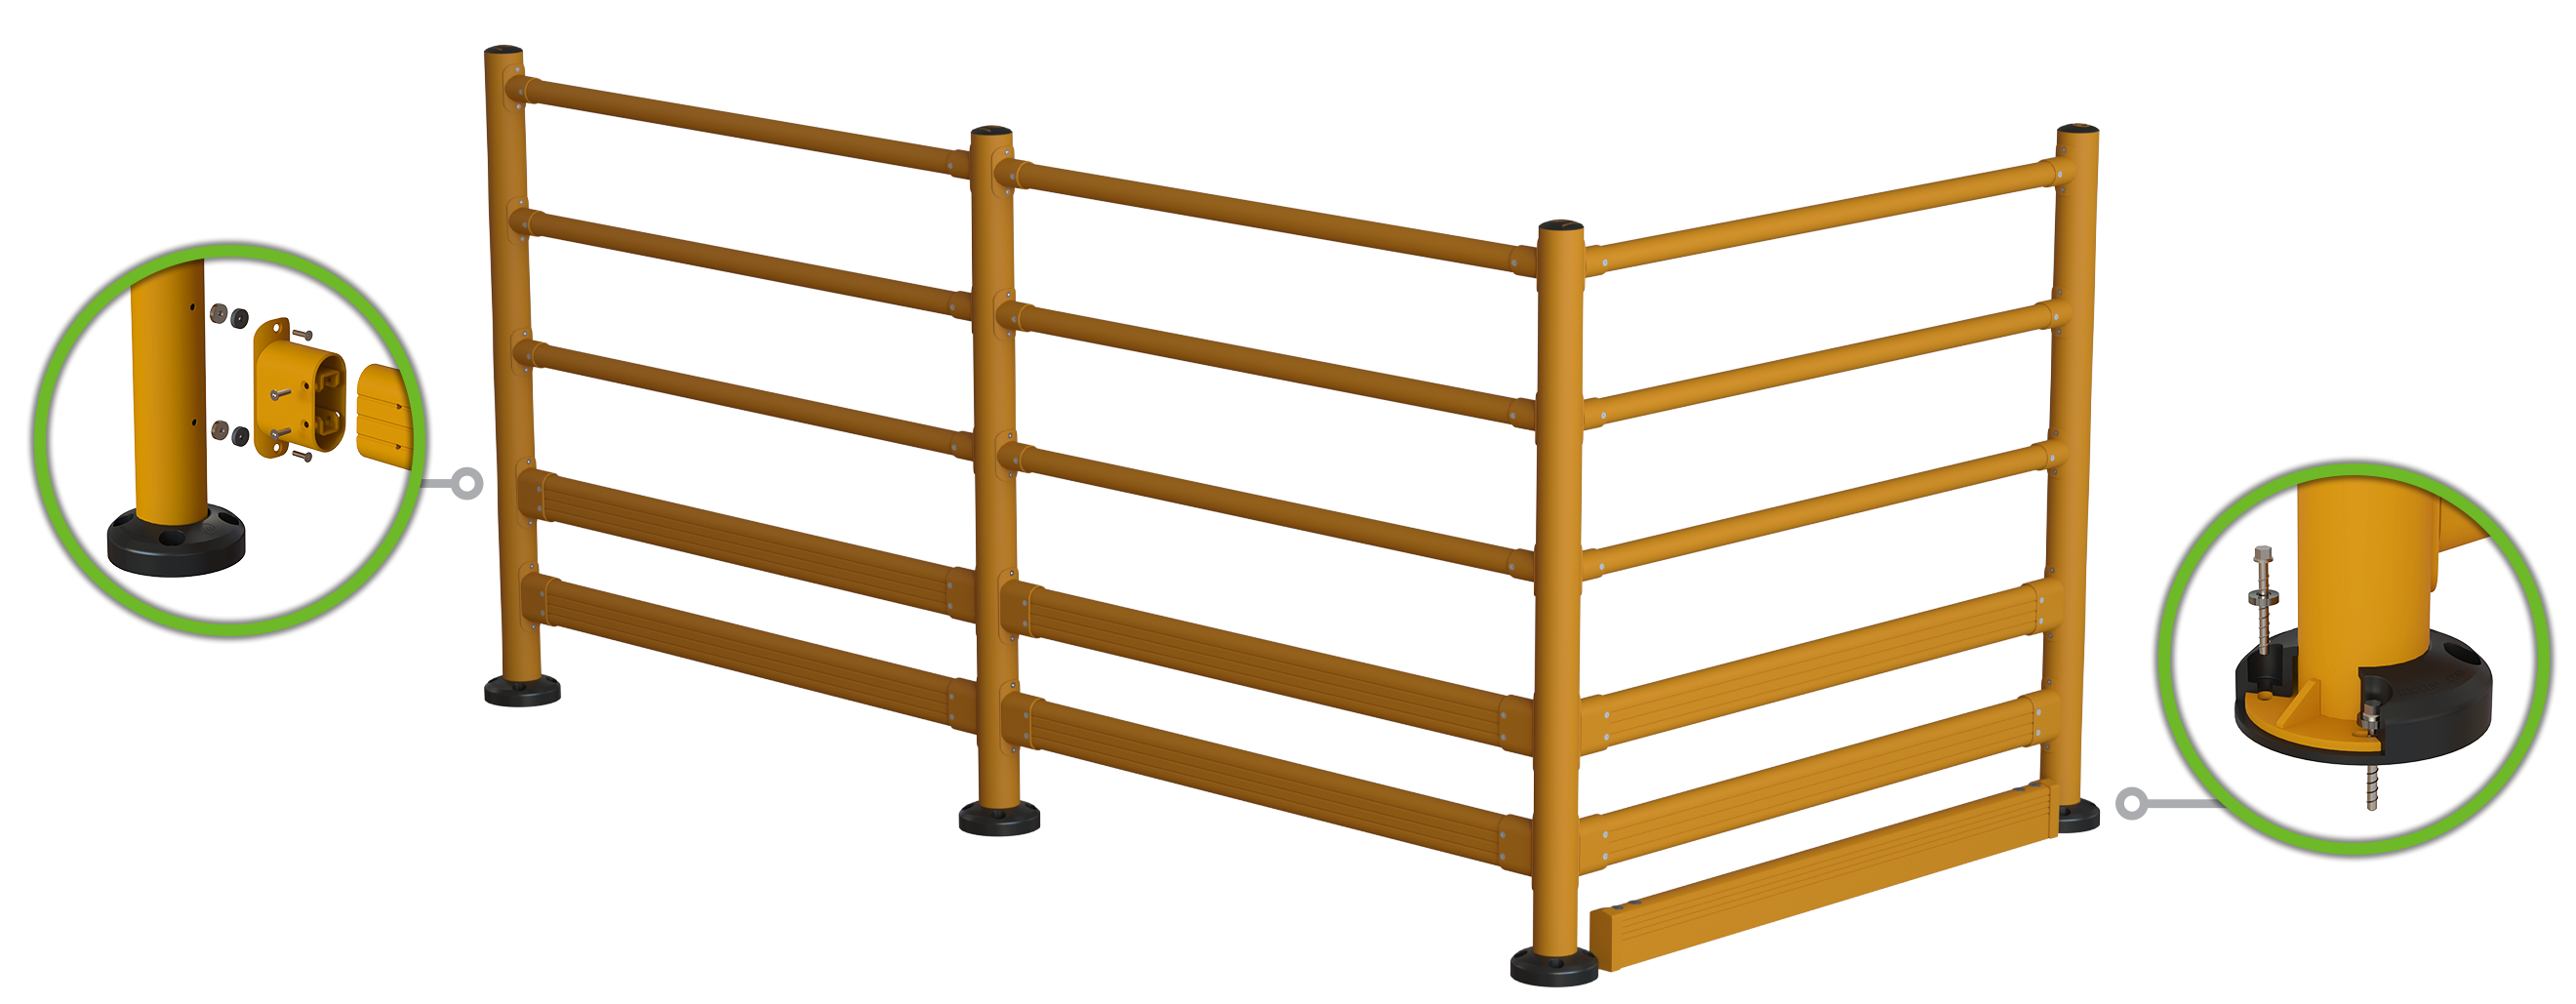 McCue Barrier How It Works